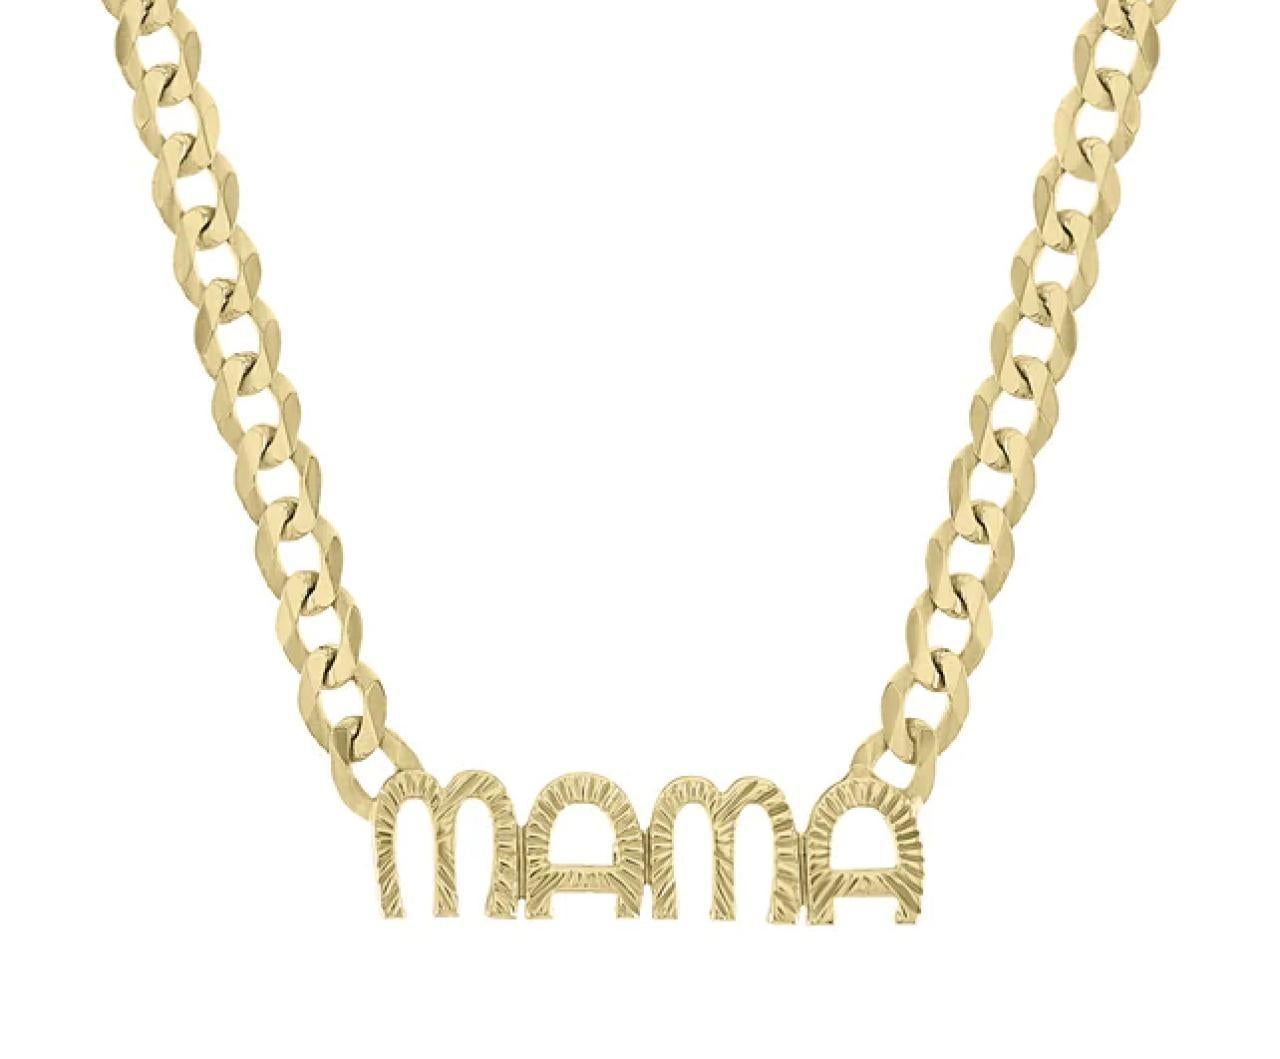 Necklace Information
Metal : 14k
Metal Color : Yellow Gold
Dimensions : 6MM H
Length : 18 Inches
Cuban Chain Size : 3MM
 

JEWELRY CARE
Over the course of time, body oil and skin products can collect on Jewelry and leave a residue which can occlude